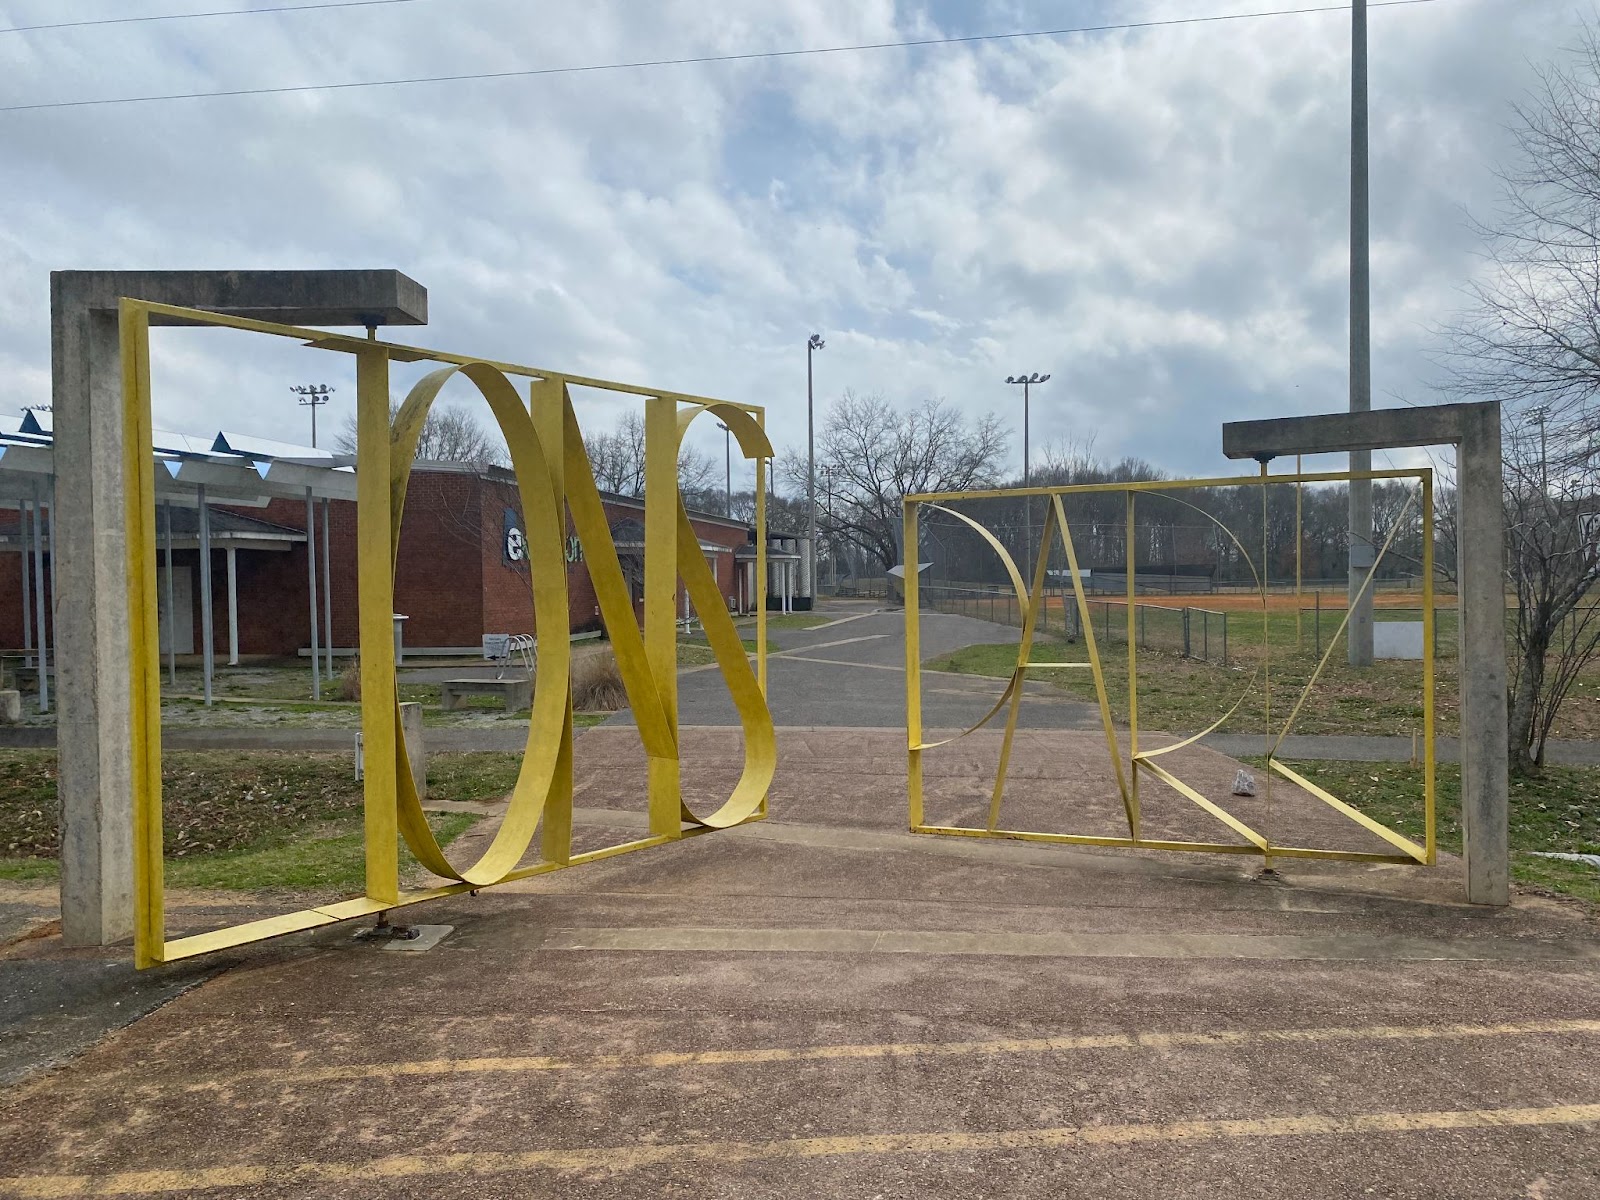 Large metal swinging gates that spell out the words "Lions Park."